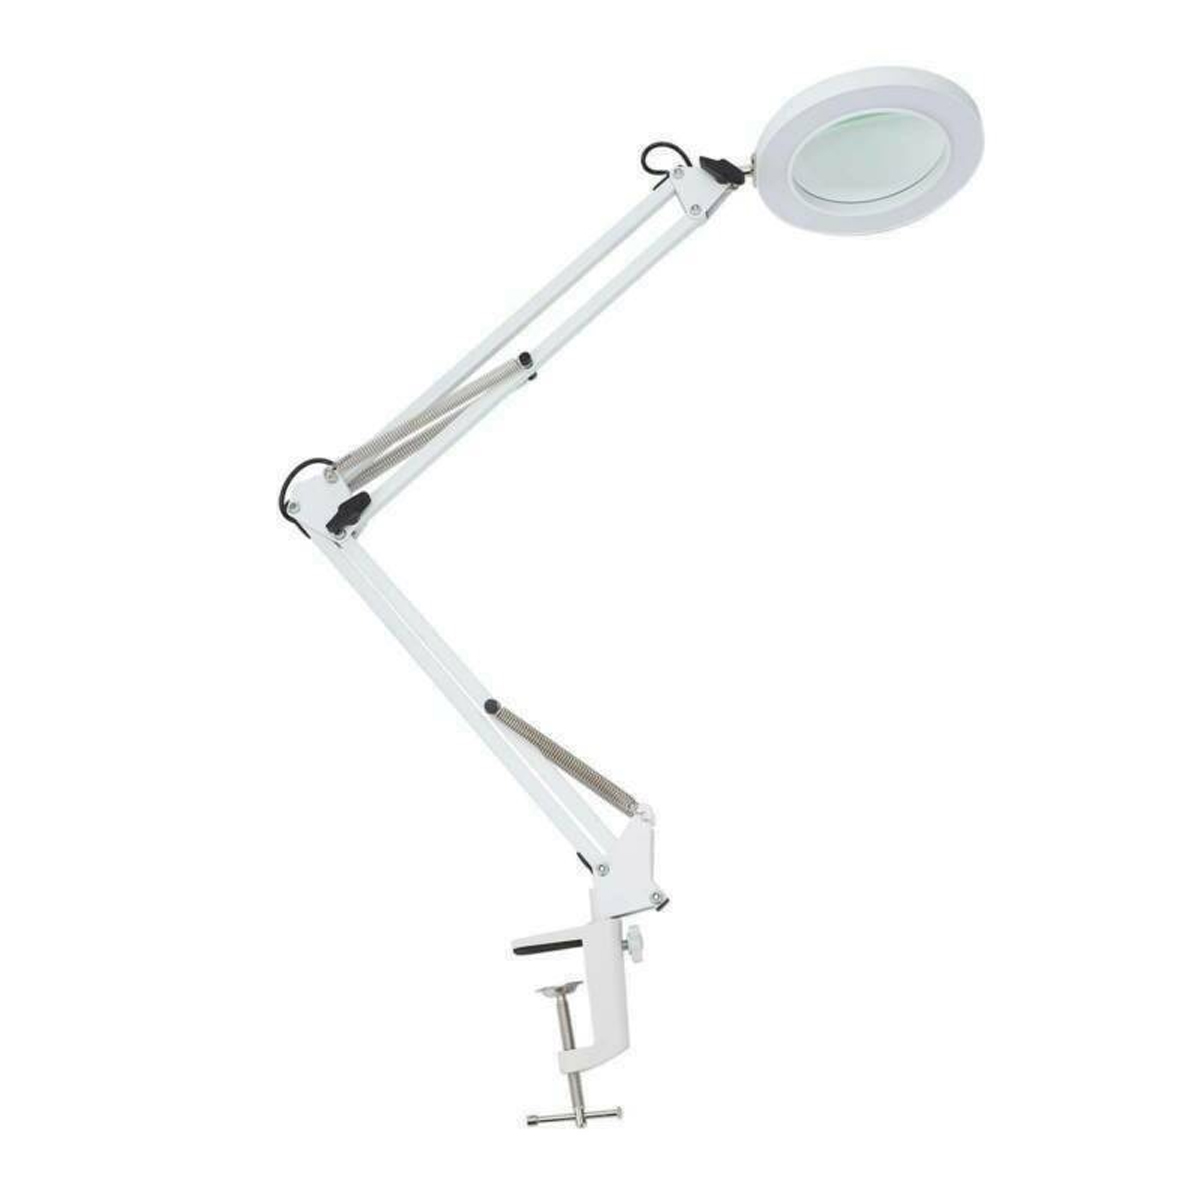 Find AU Large Lens ed Lamp Desk Magnifier 5x Magnifying Glass w/ Clamp LED for Sale on Gipsybee.com with cryptocurrencies